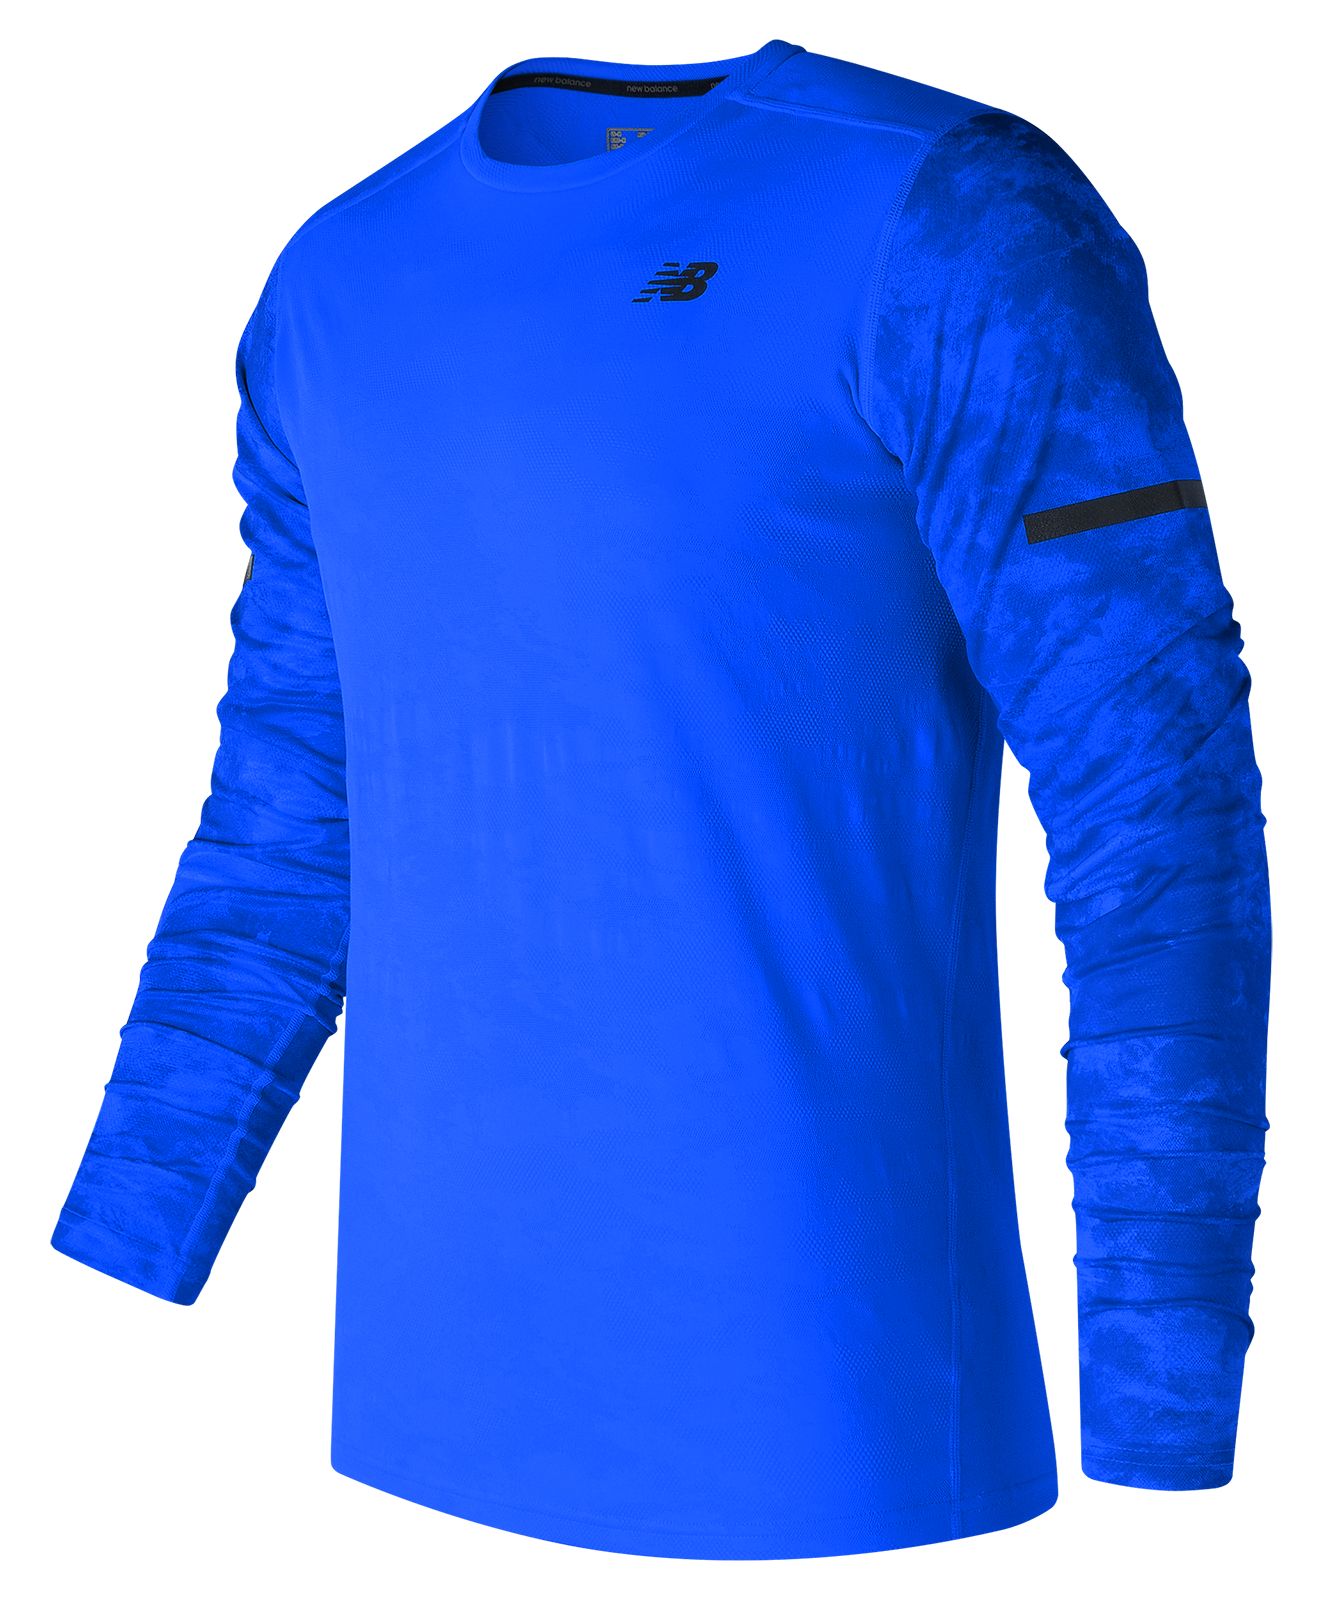 New Balance Max Intensity Long Sleeve Men’s 71049 Tops Performance Electric Blue with Atlantic I15c85361